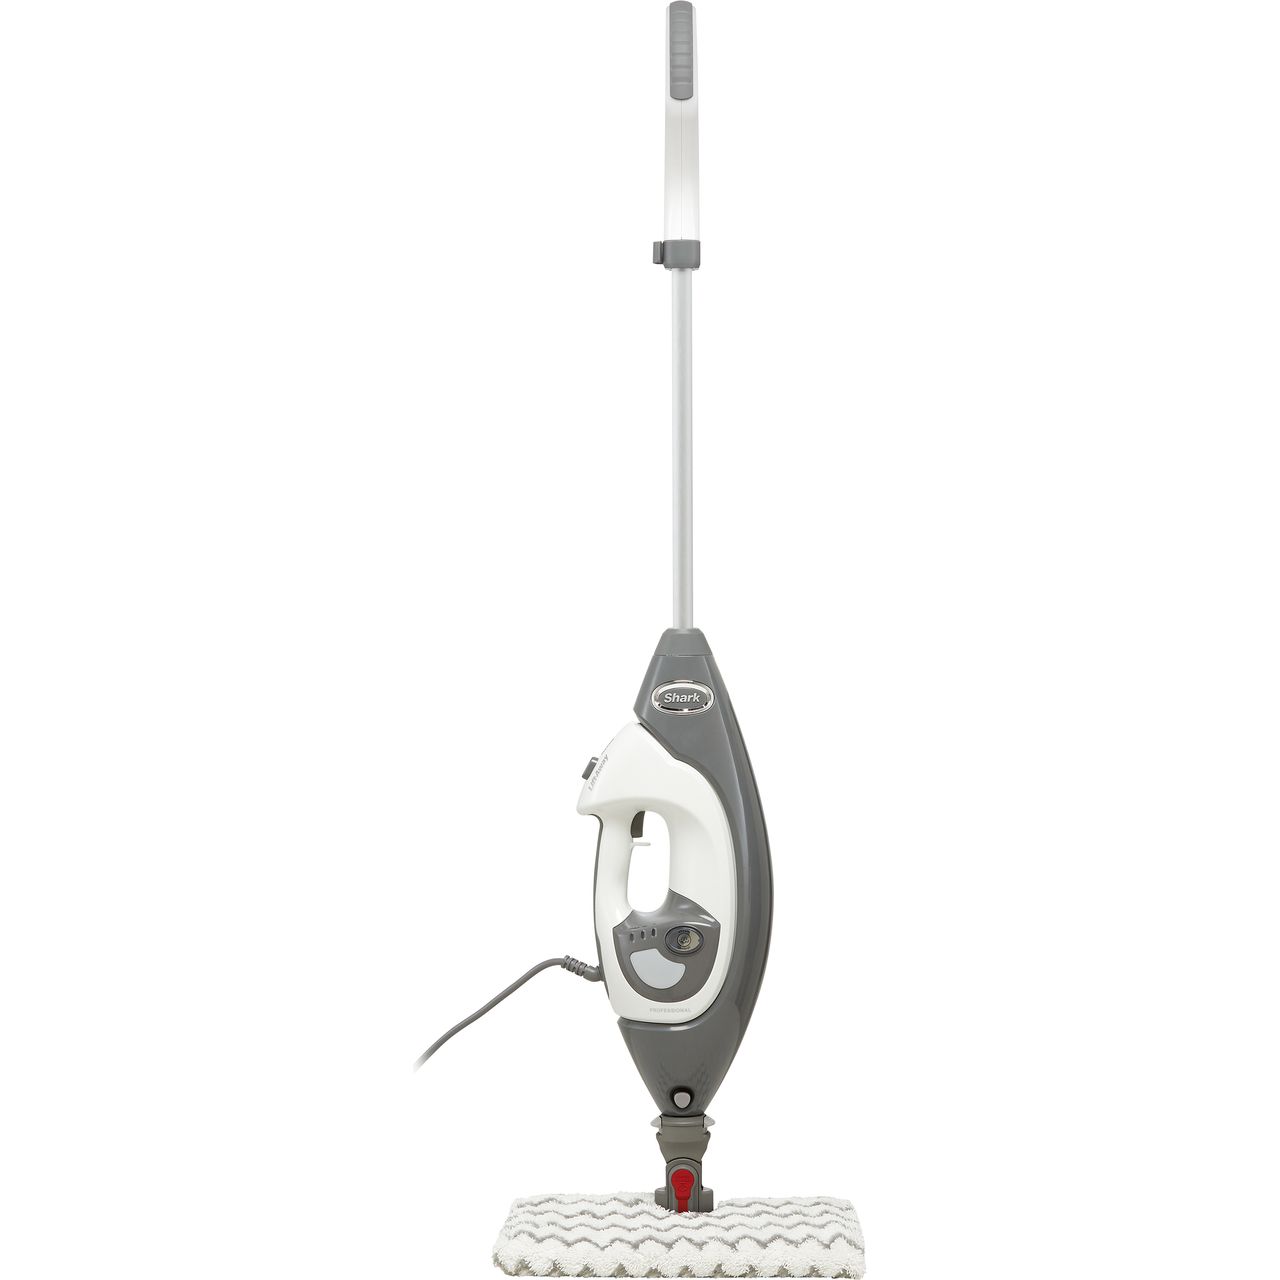 shark floor handheld s6005uk steam mop with detachable handheld and up to 15 minutes run time